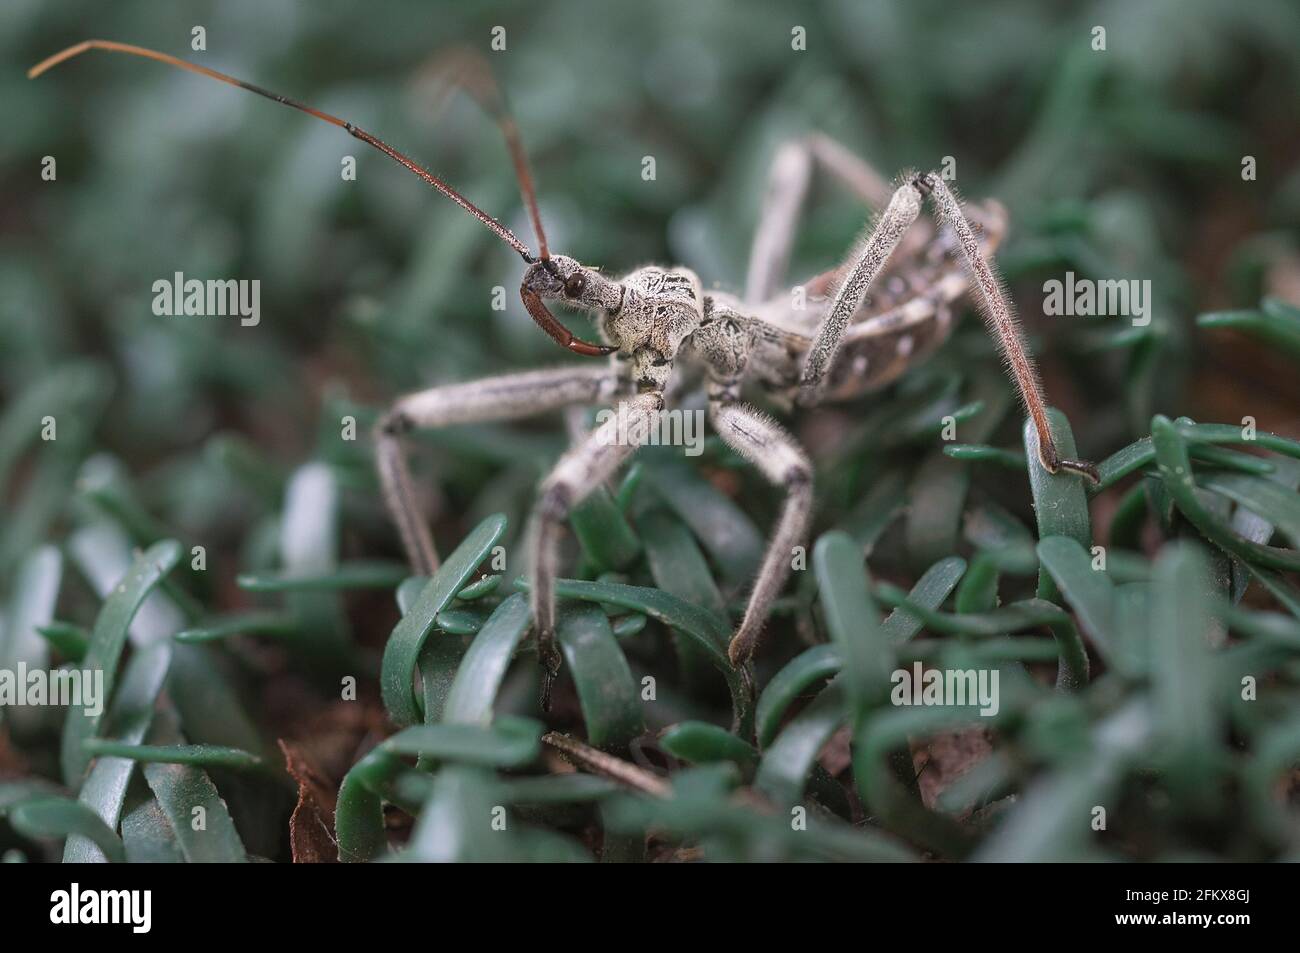 The Wheel Bug or Arilus cristatus in it's nymph stage of development...It is a very aggressive predator and is often referred to as 'Assassin Bug'. Stock Photo